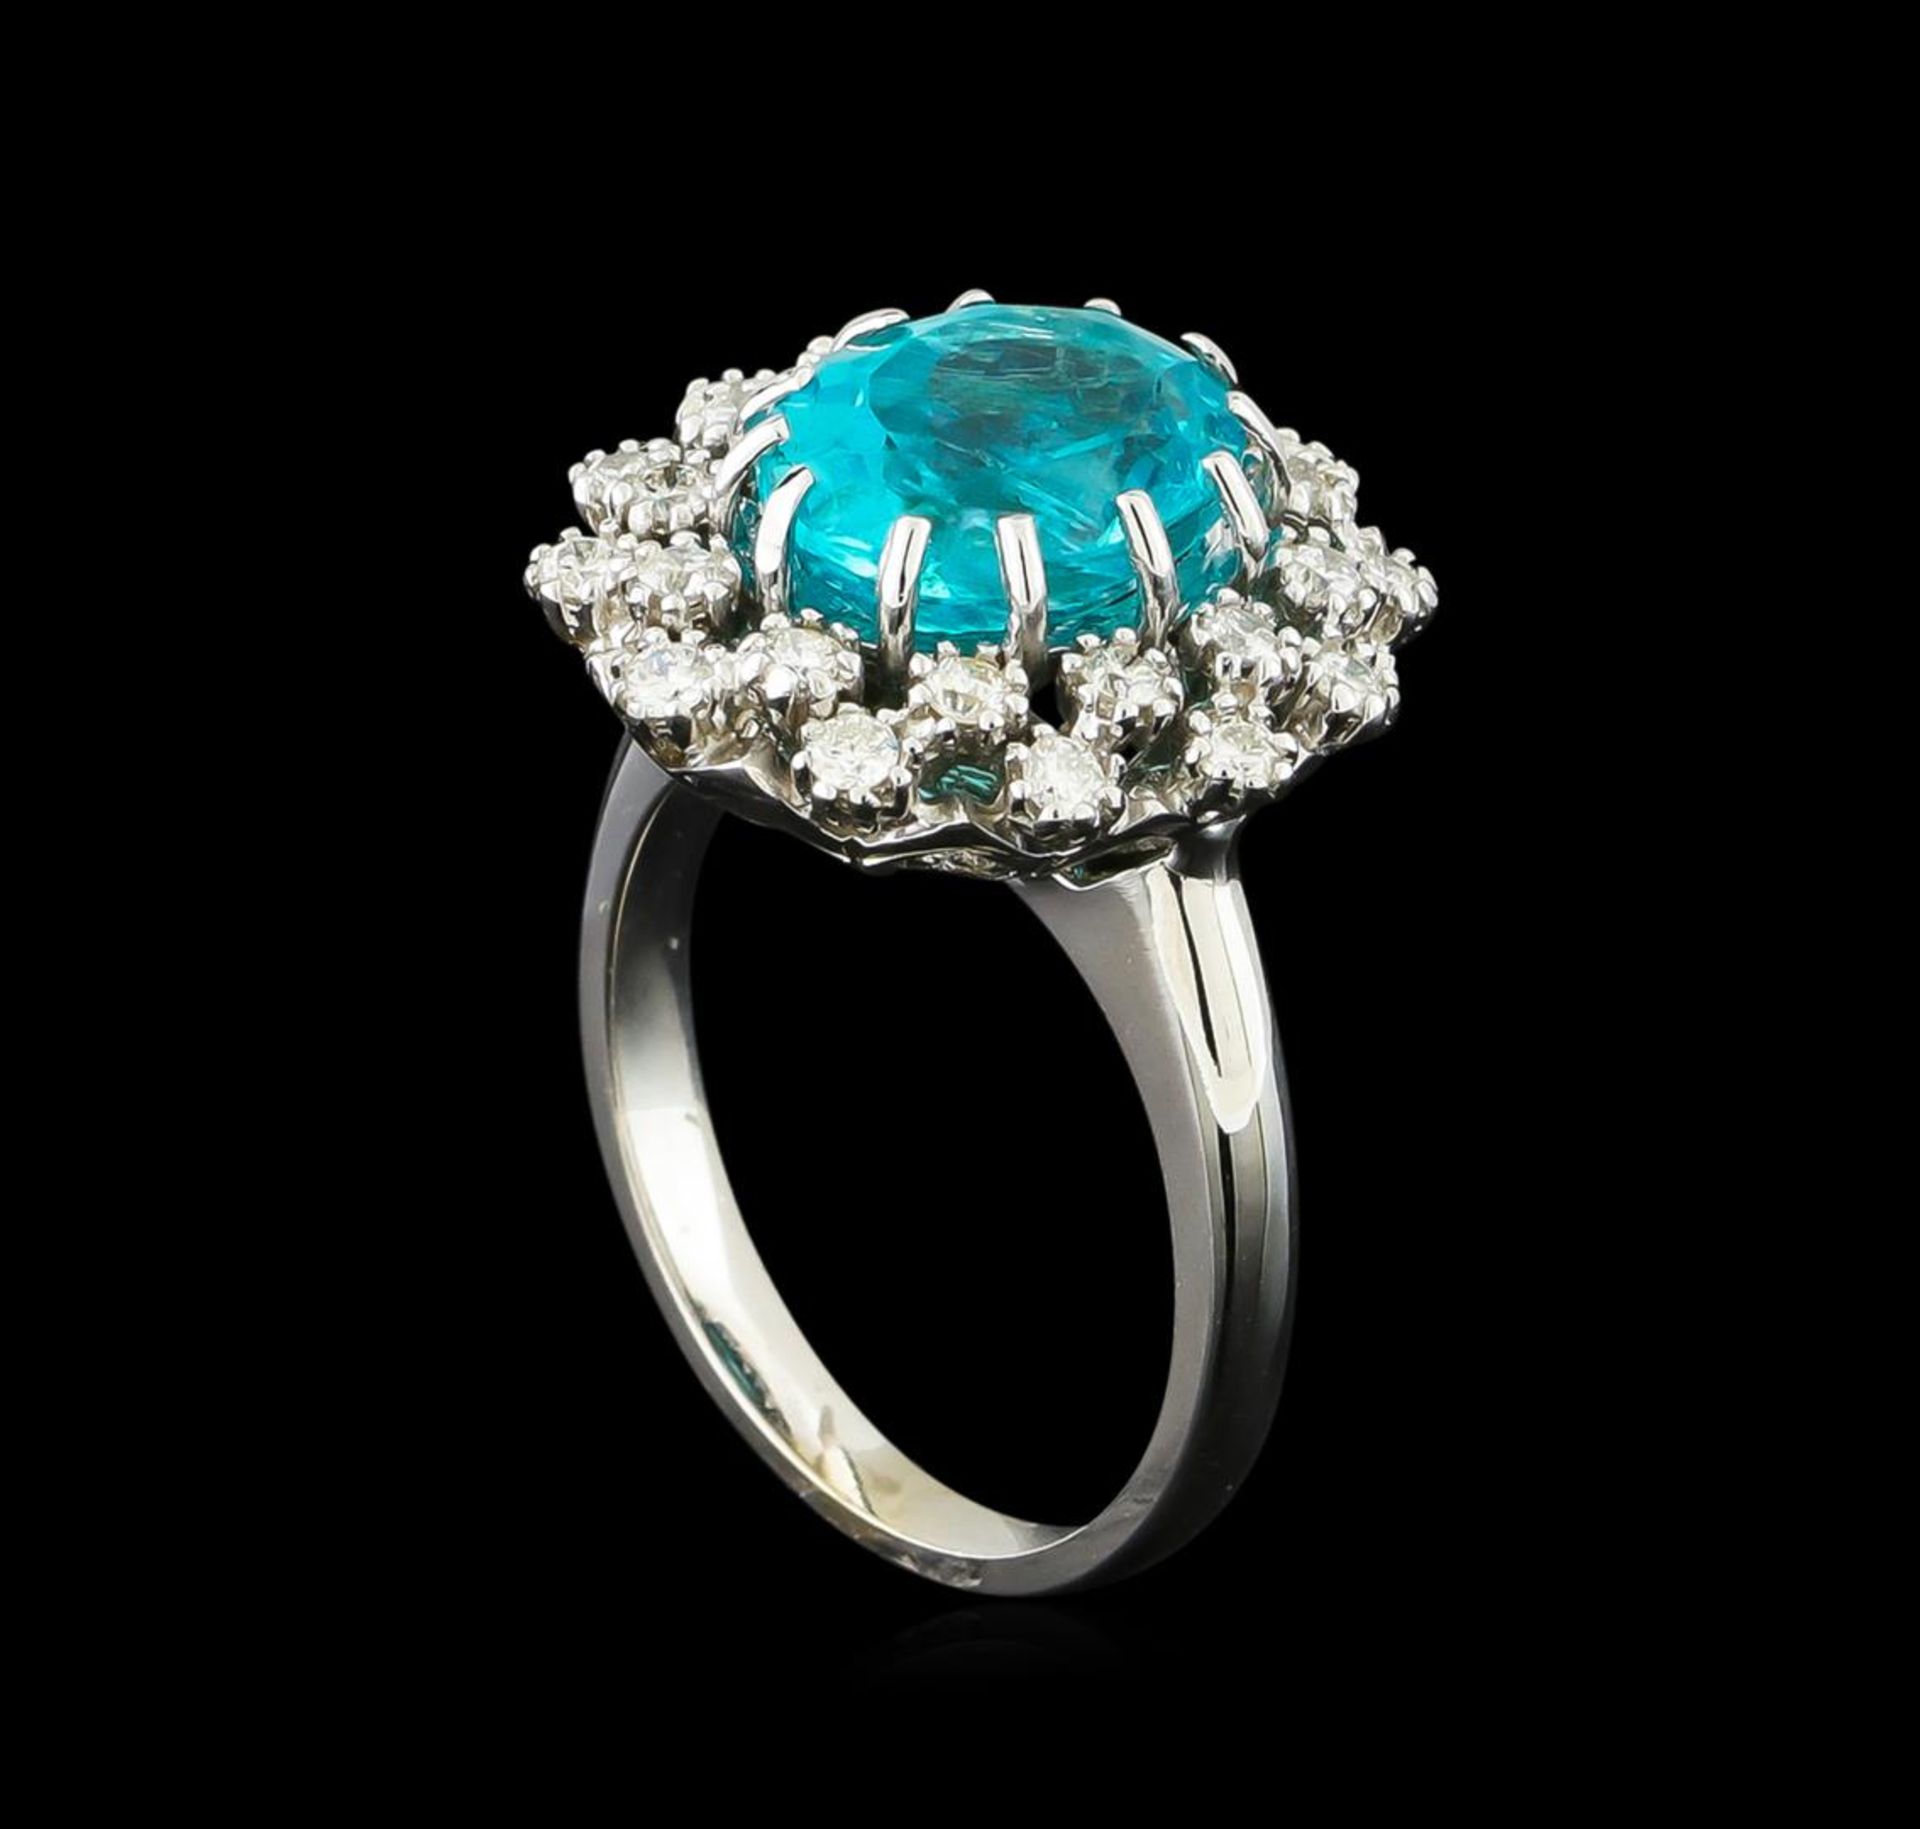 4.08 ctw Apatite and Diamond Ring - 14KT White Gold - Image 4 of 4